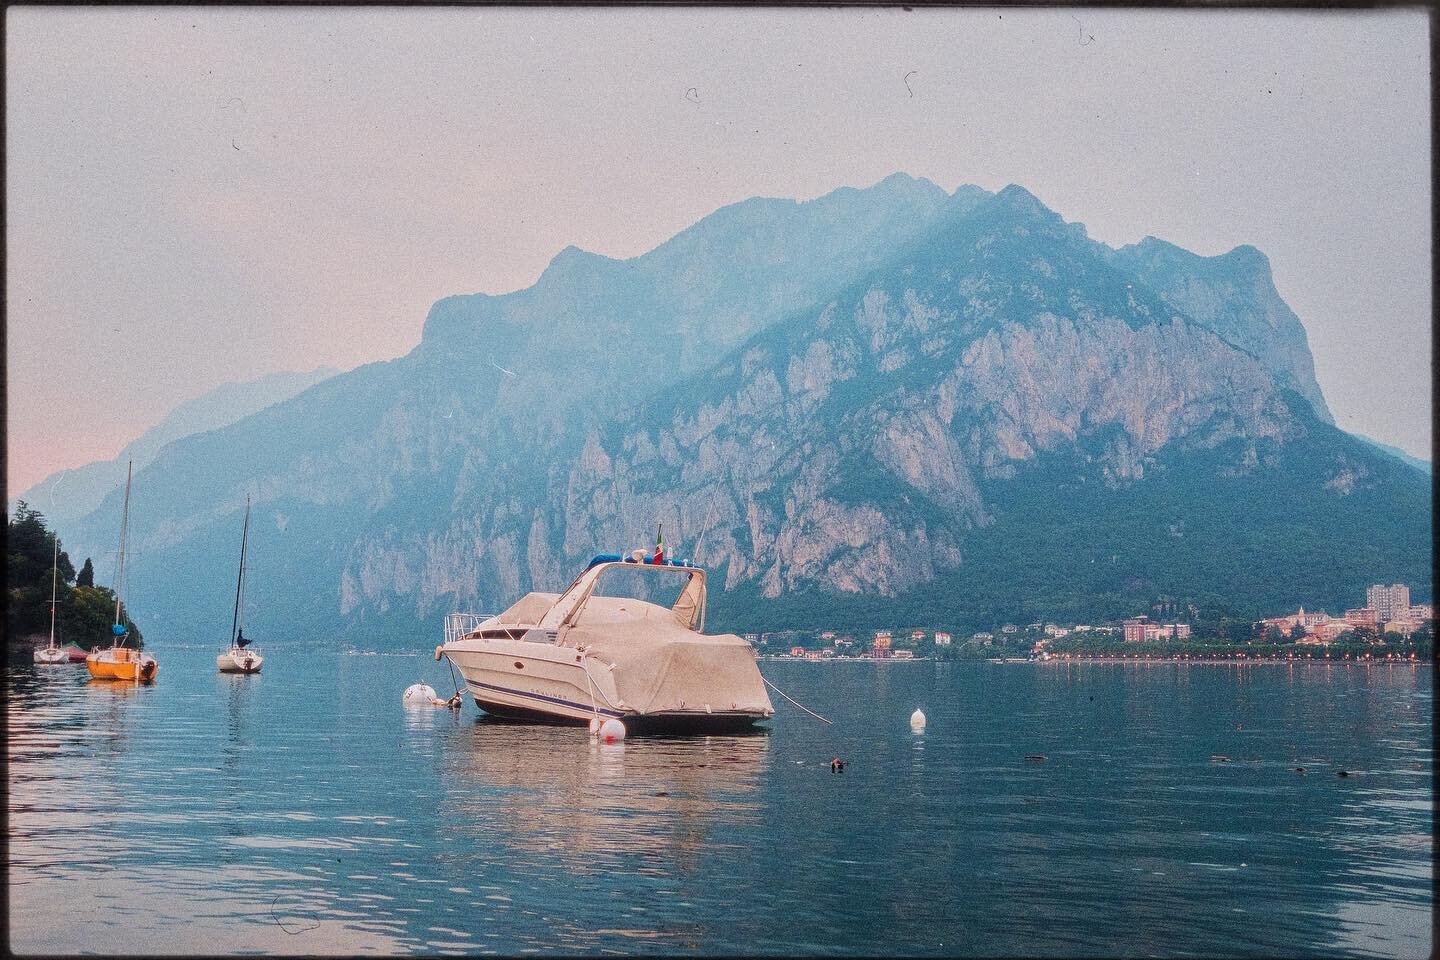 I was living my national geographic photographer fantasy taking pictures of the gorgeous lake Como. For some reason I got kind of focused on boats that day. Lake Como, Italy, Summer 2019